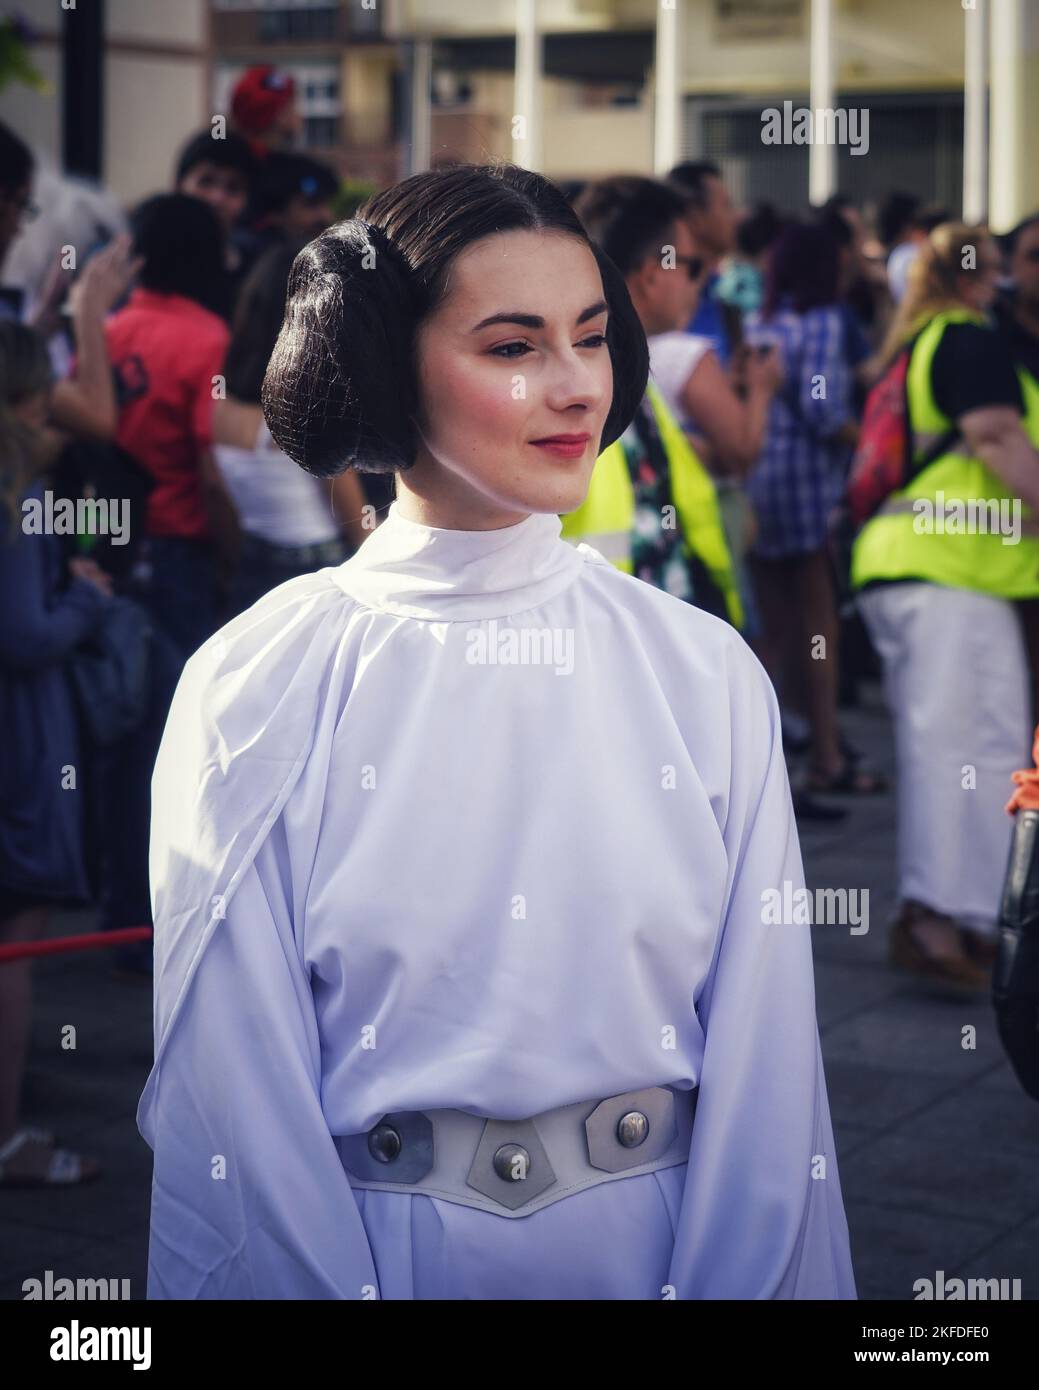 A girl cosplaying Princess Leia from Star Wars at Fantasy fest Fuenlabrada Stock Photo